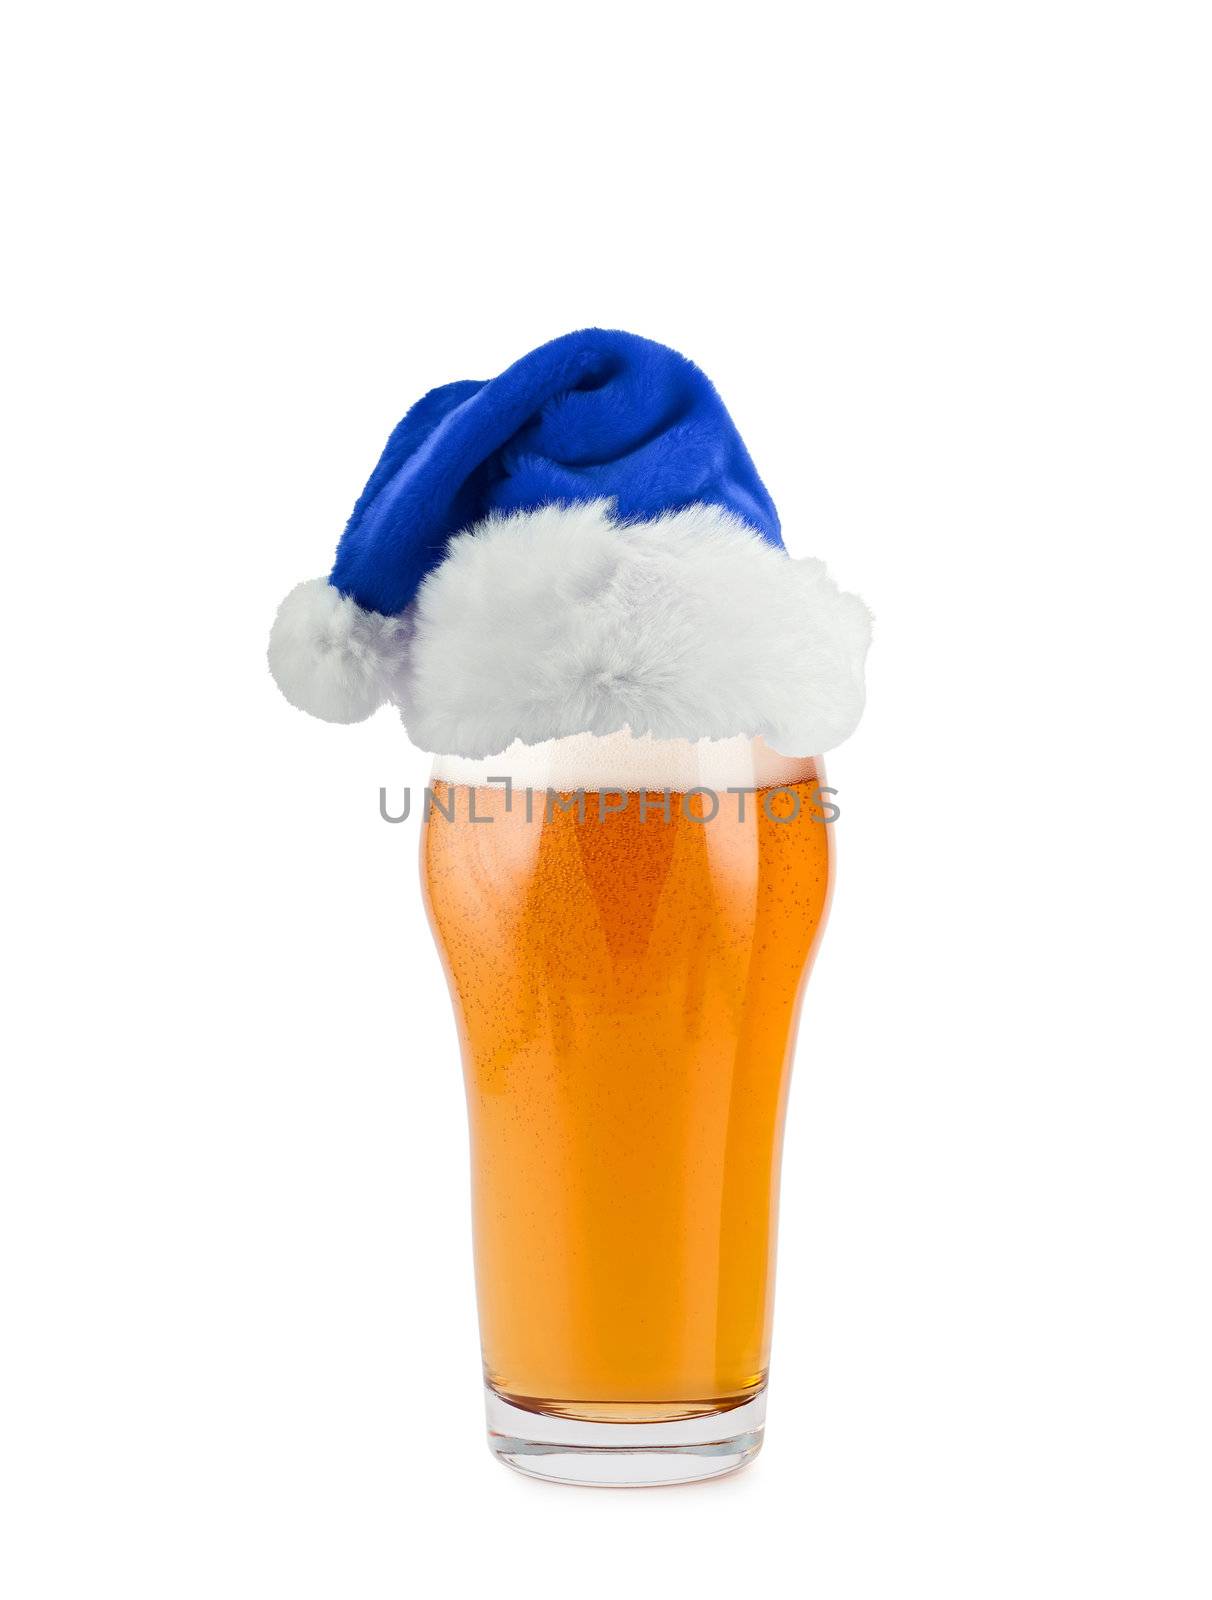 Santa Claus hat with beer